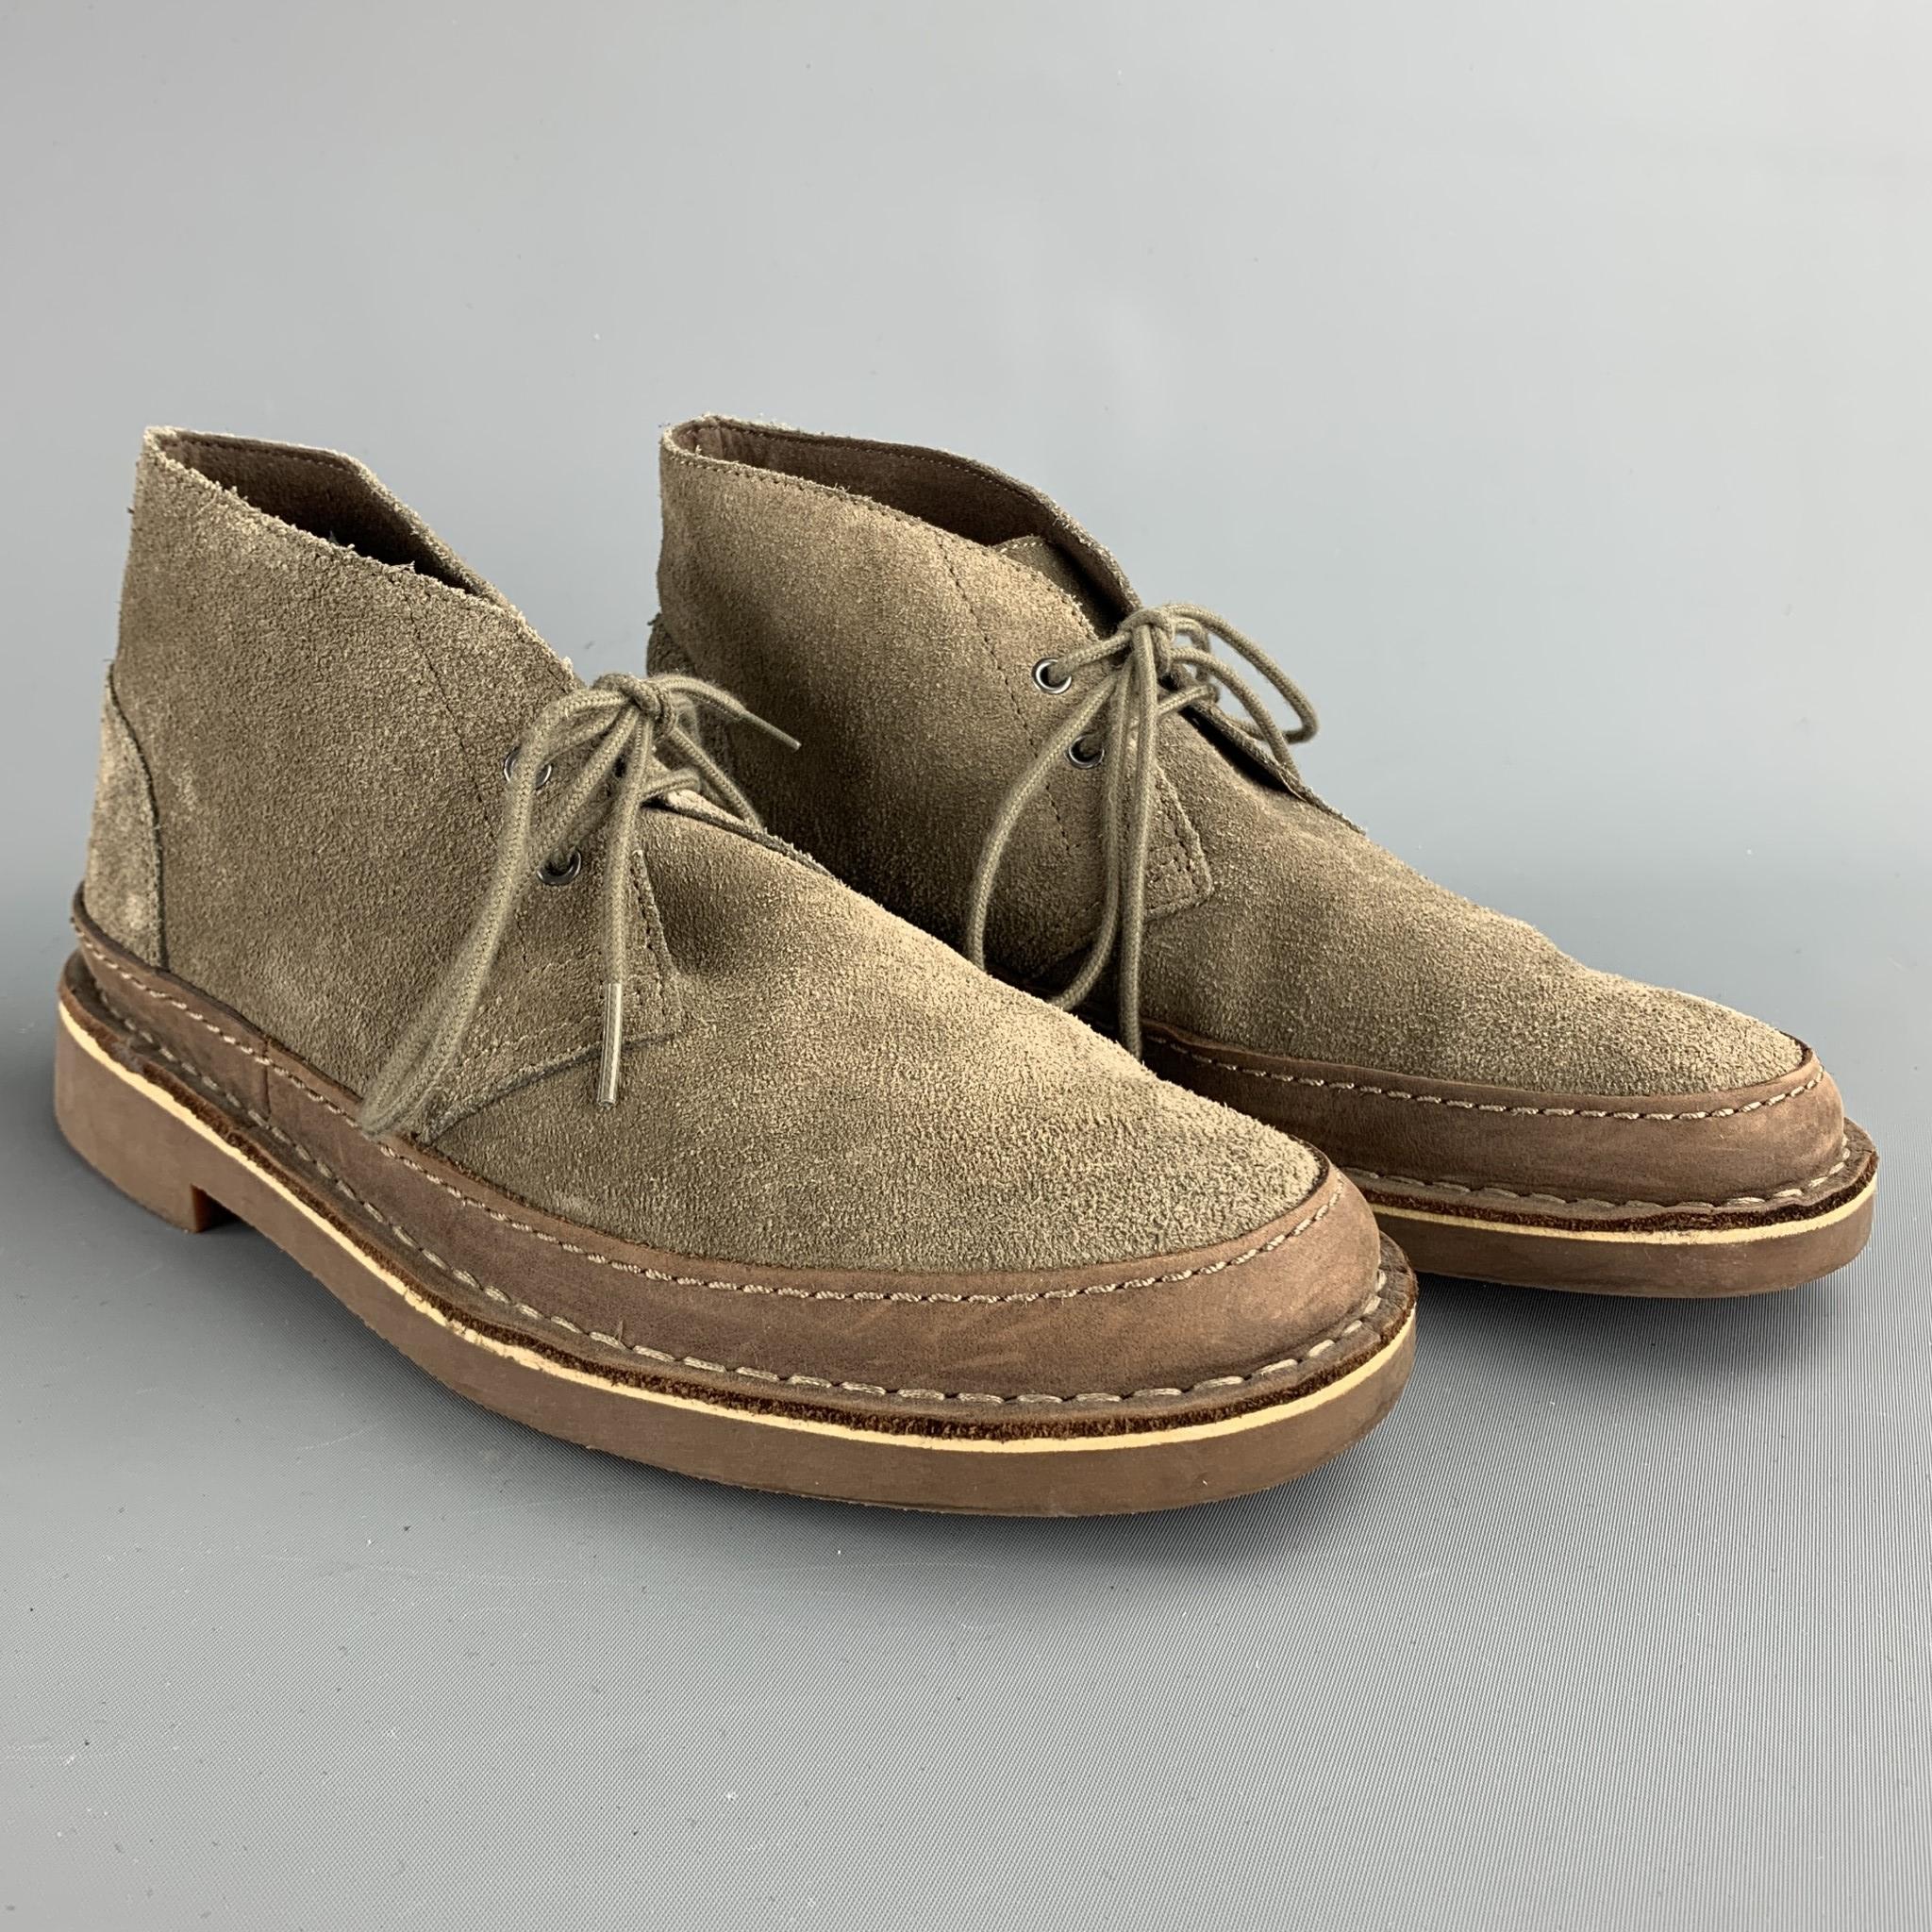 CLARKS boots comes in a taupe suede with contrast stitching featuring a chukka style and a lace up closure. As-Is.

Good Pre-Owned Condition.
Marked: 7 M

Outsole:

11 in. x 4 in. 
SKU: 88066
Category: Boots

More Details
Brand: CLARKS
Size: